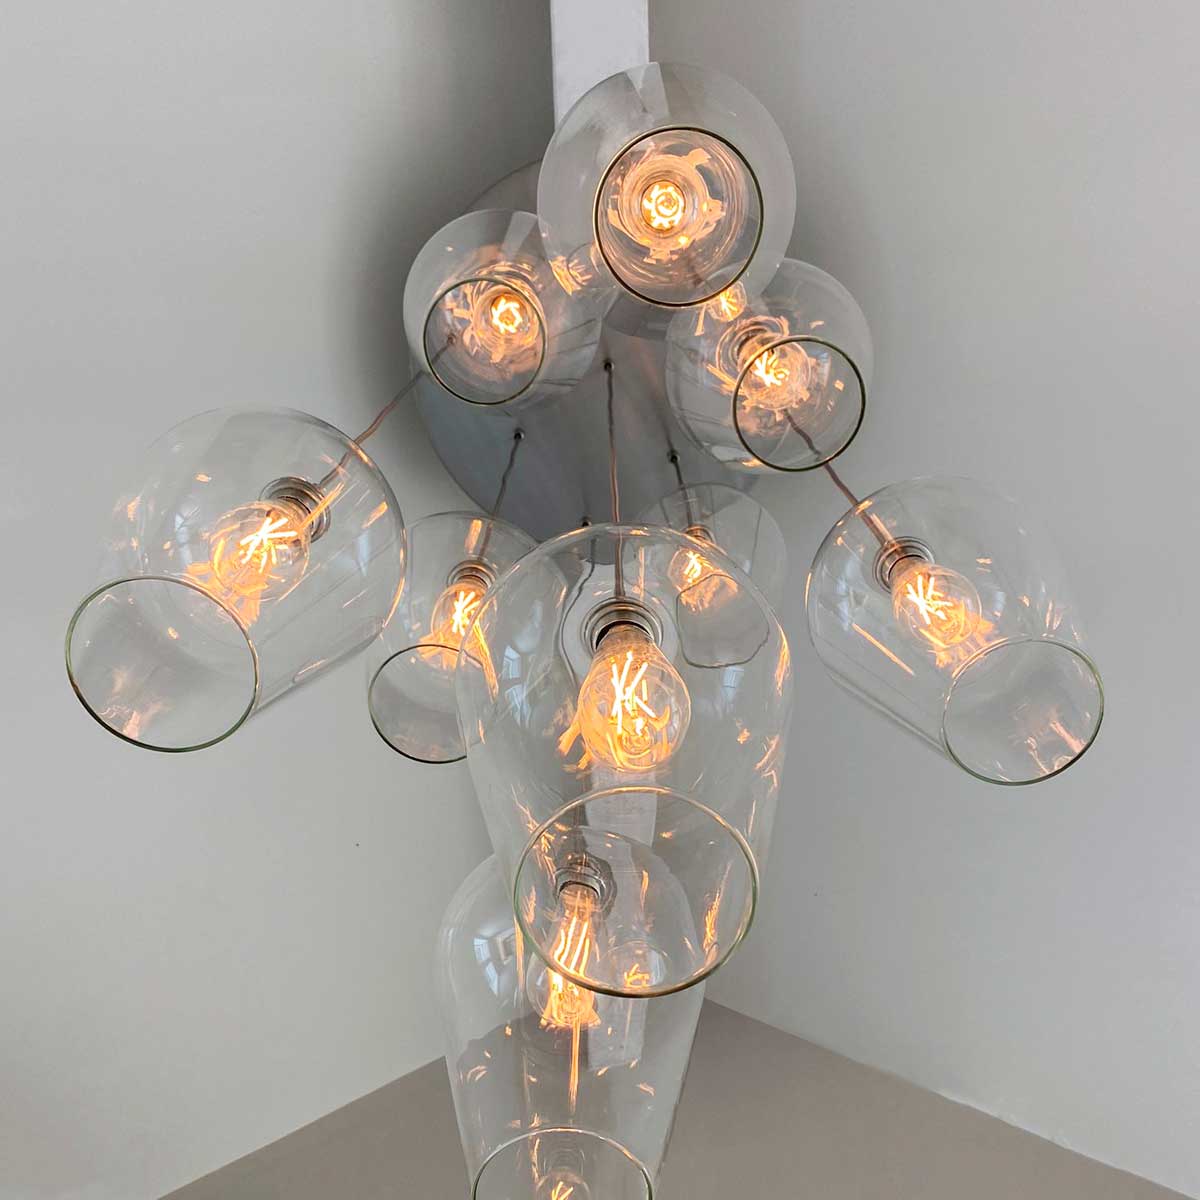 Blown glass pendant lights sold by South Charlotte Fine Lighting